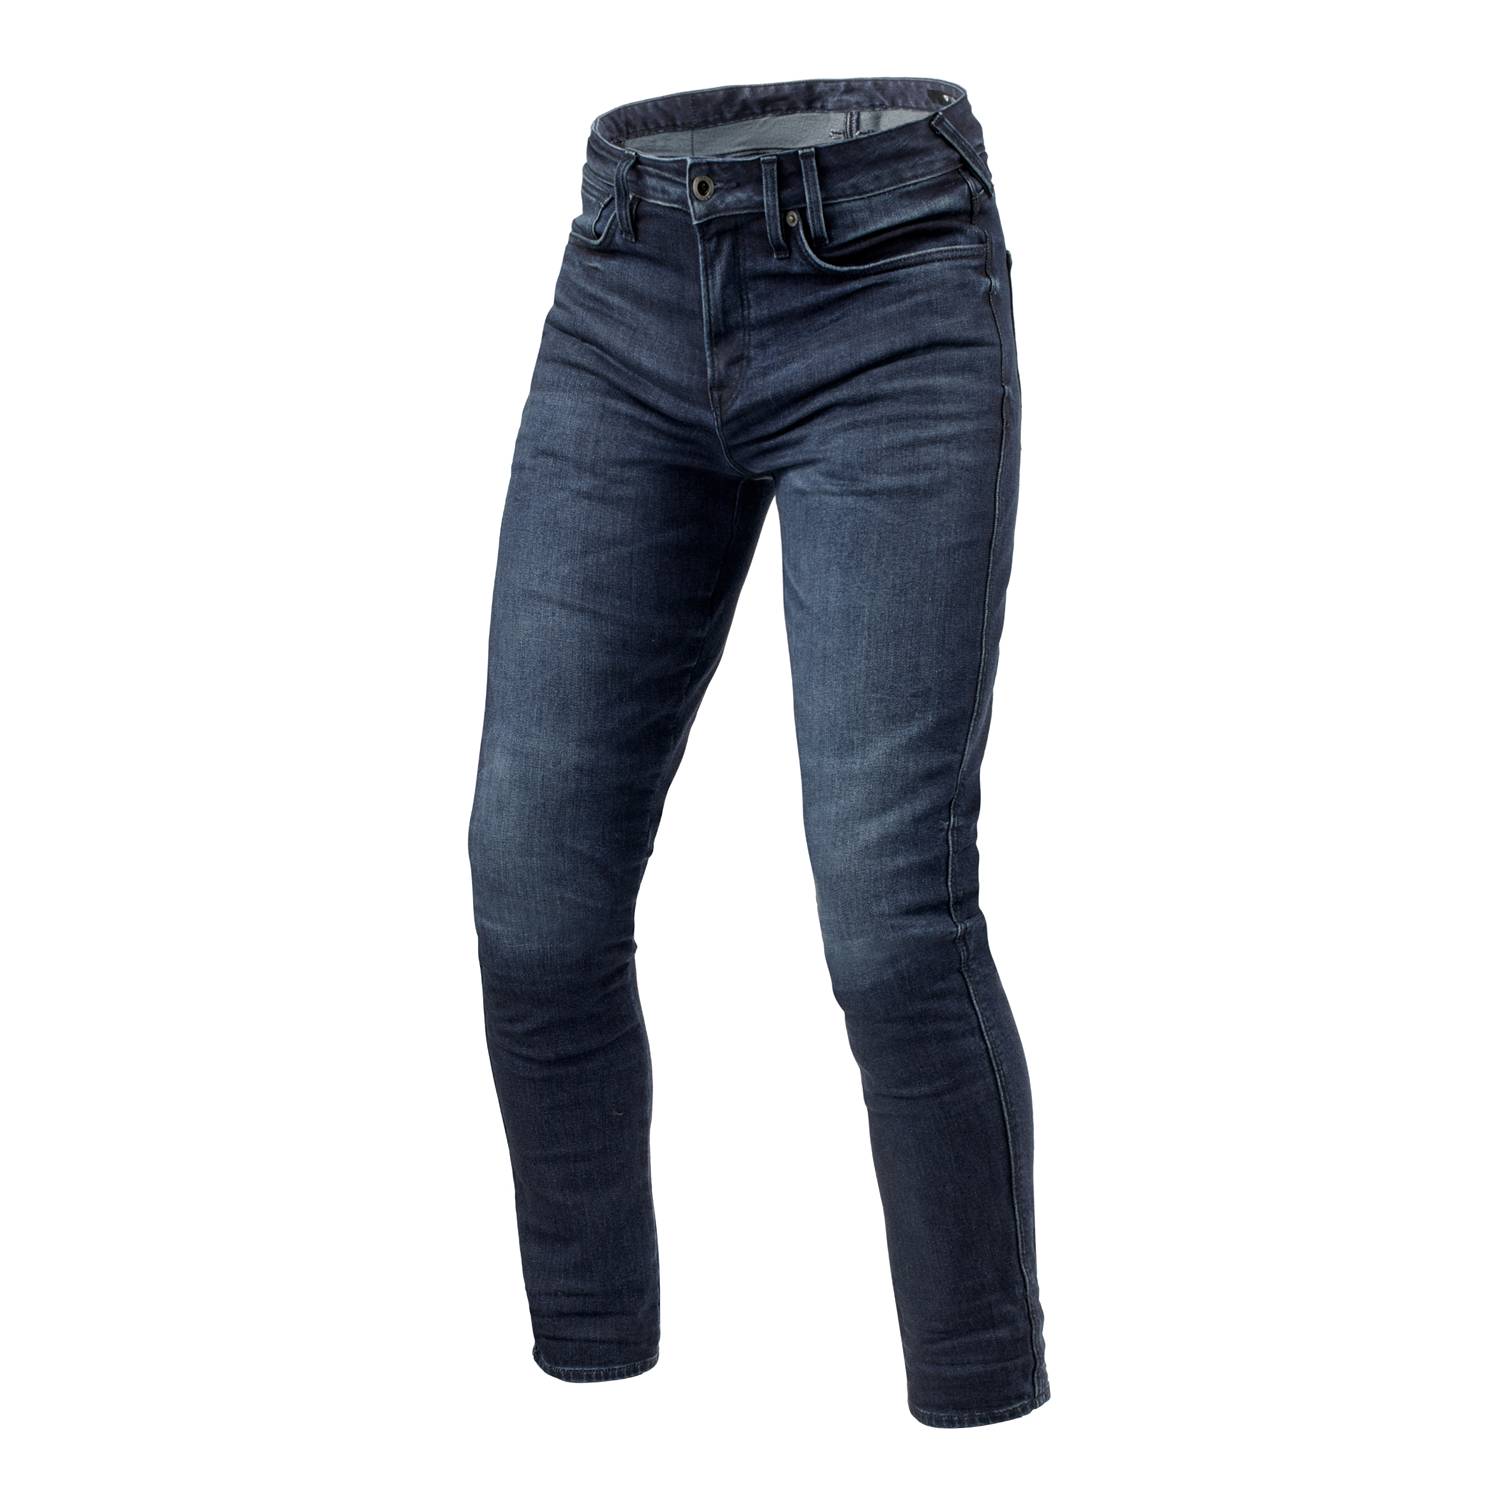 Image of REV'IT! Jeans Carlin SK Dark Blue Used L32 Motorcycle Jeans Size L32/W30 ID 8700001376464